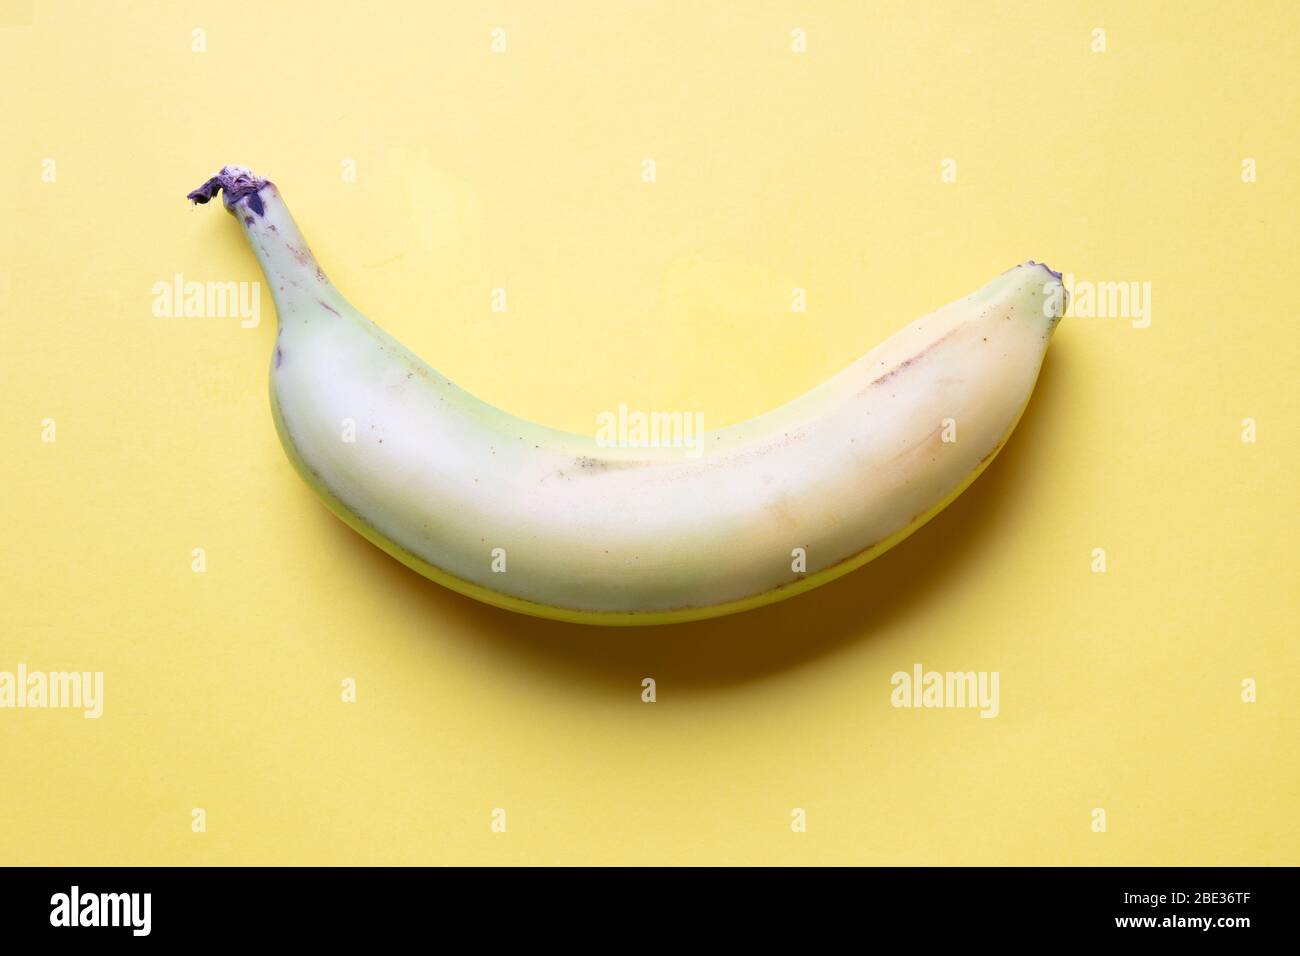 a fantastic pastel coloured image of a banana against a yellow background, flat lay, top view Stock Photo